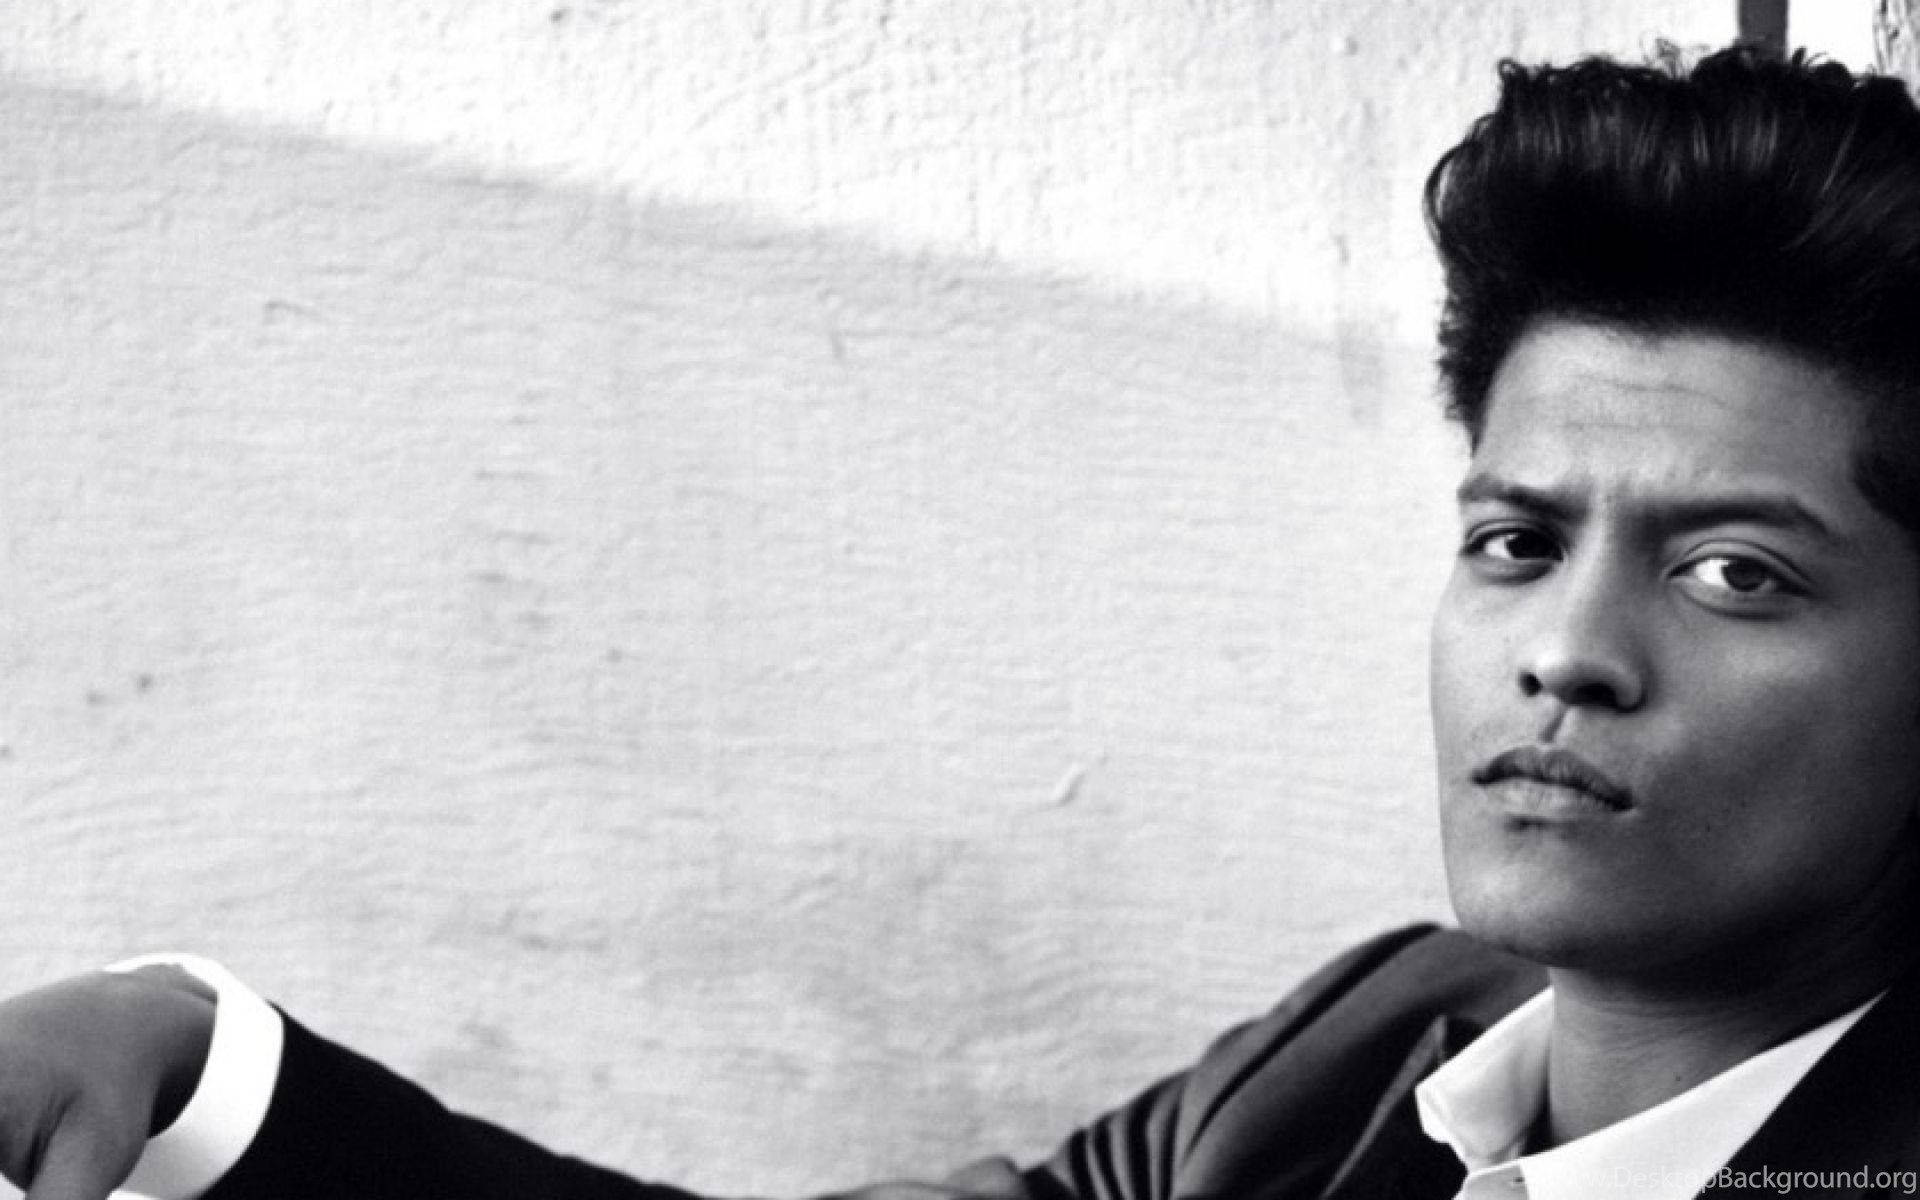 Bruno Mars rocking a classic black and white style Wallpaper